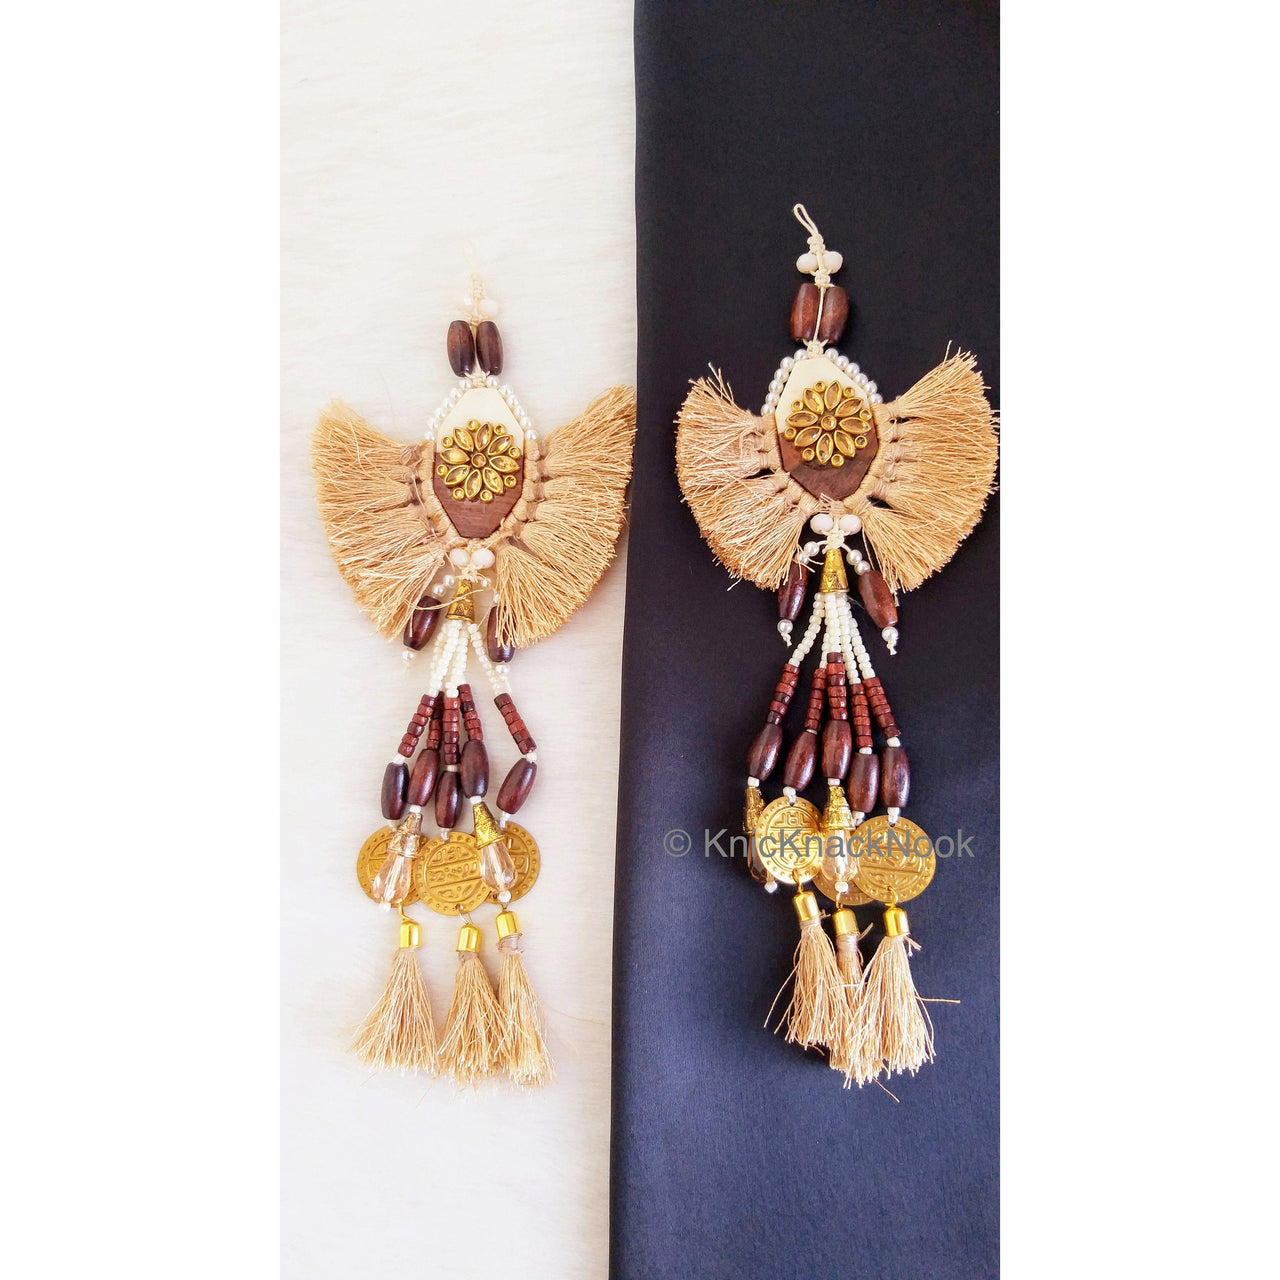 Beige Tassels With White Acrylic And Brown Wood Button In Kundan Stones, Wood Beads, Pearls